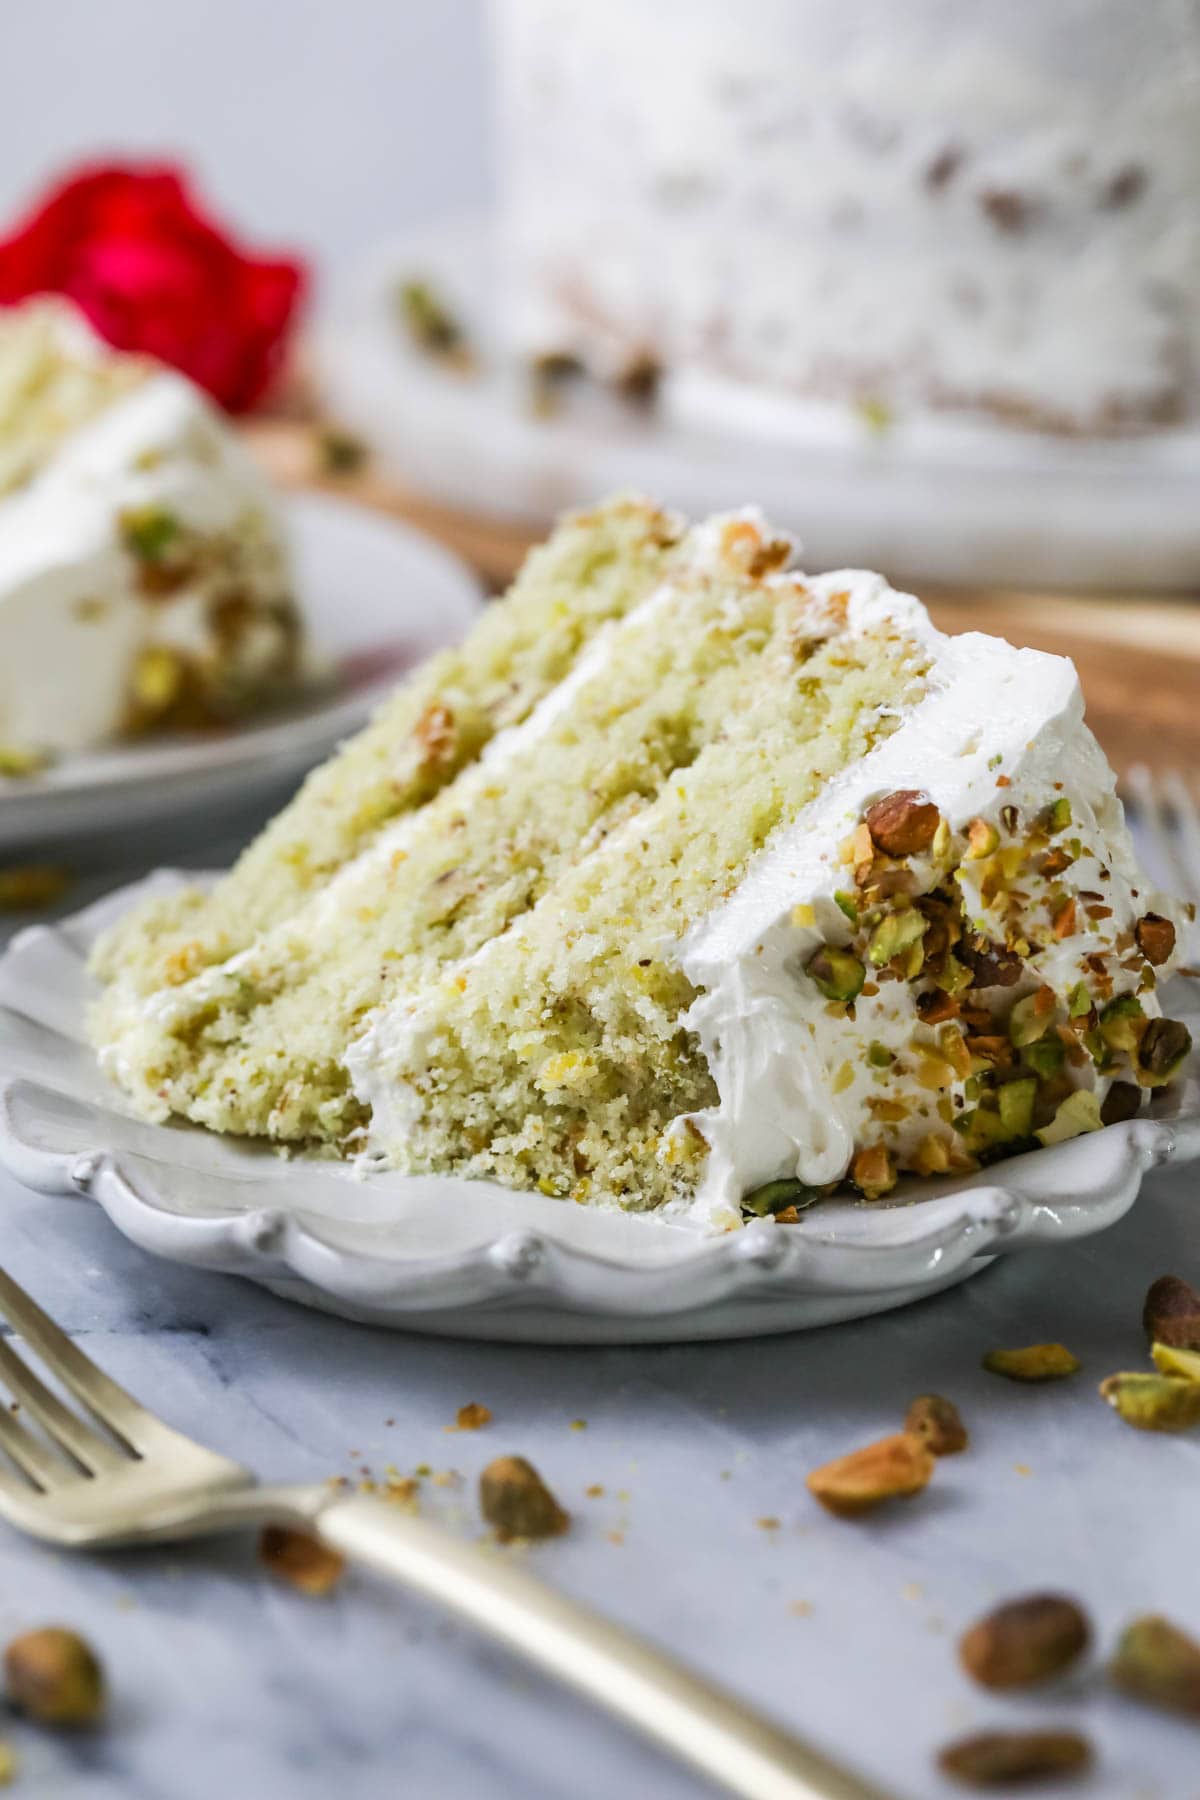 Slice of pale green layer cake made with pistachios on a white plate with one bite missing.